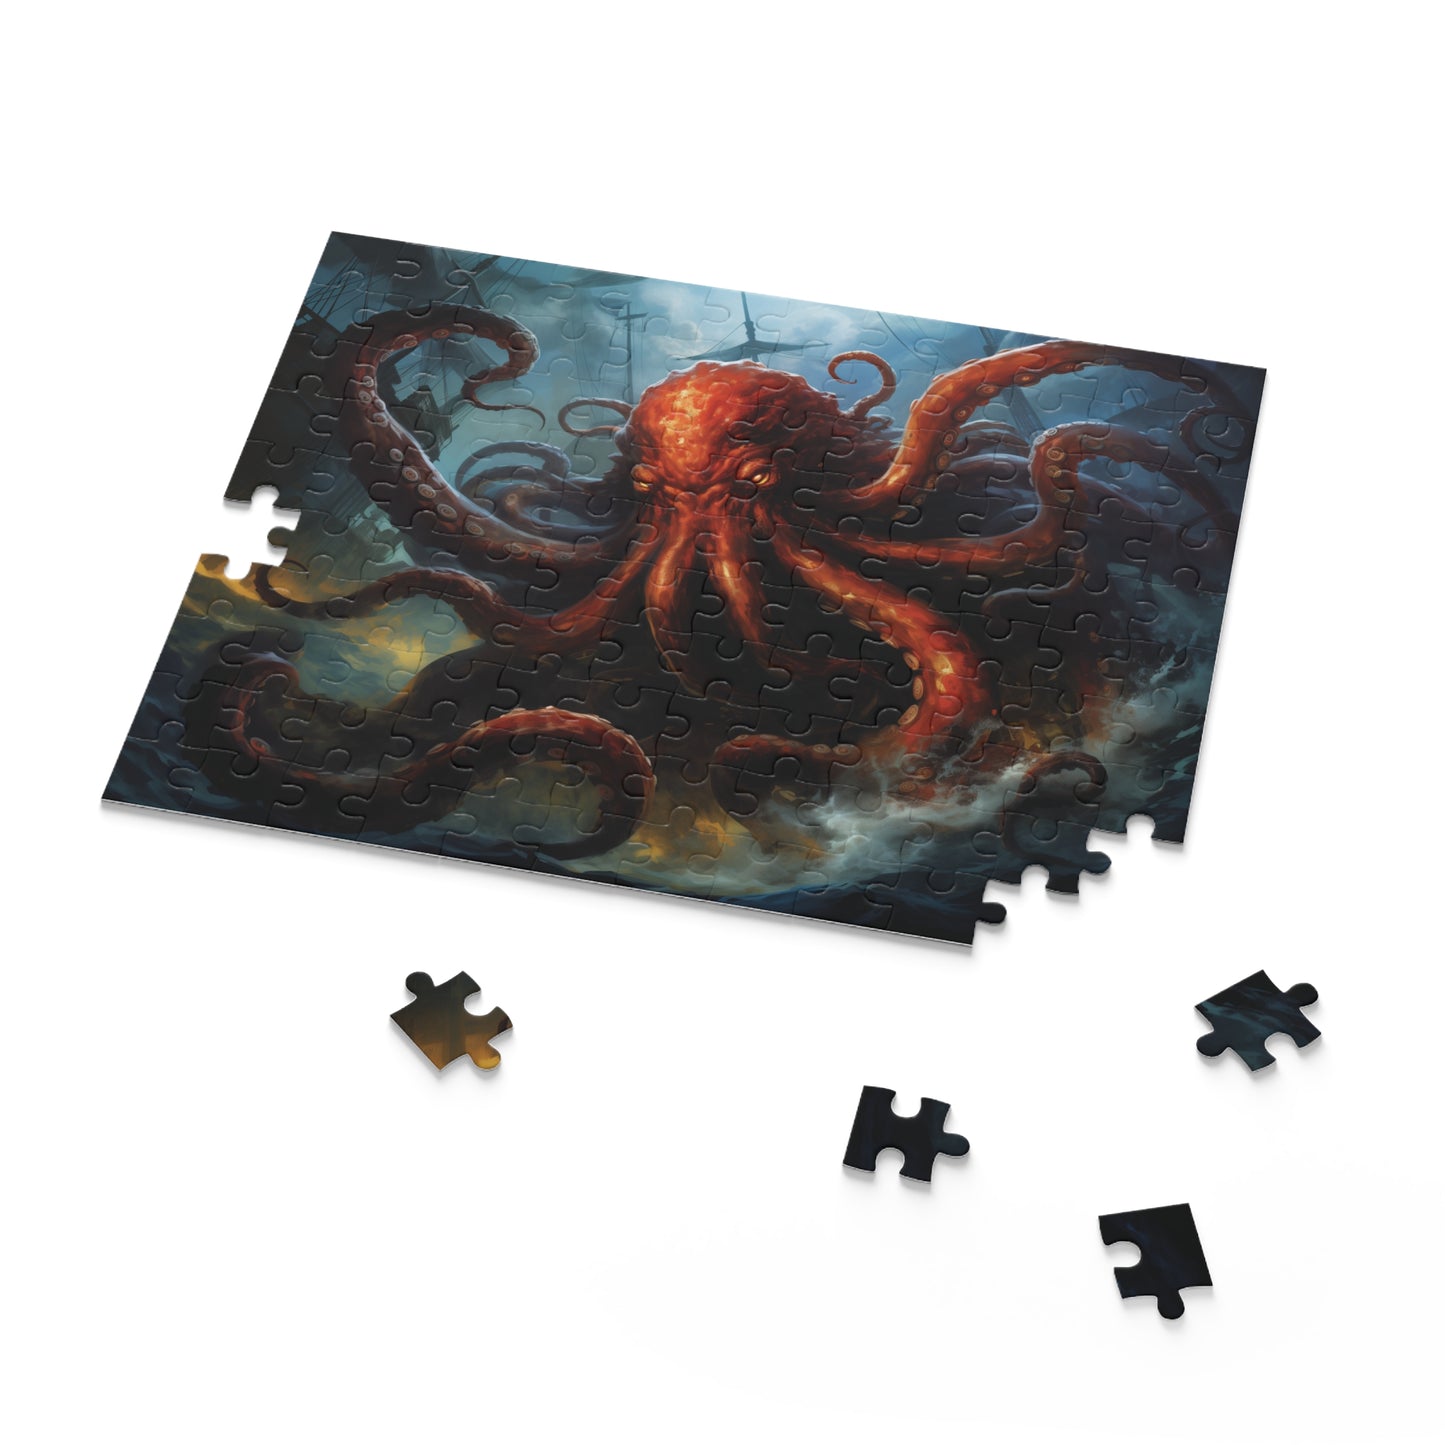 Kraken Attack Puzzle, Giant Octopus Jigsaw Puzzles, 120 pieces, 252 pieces, 500 pieces, Family Game Puzzle, Fantasy Creature Lover Gift